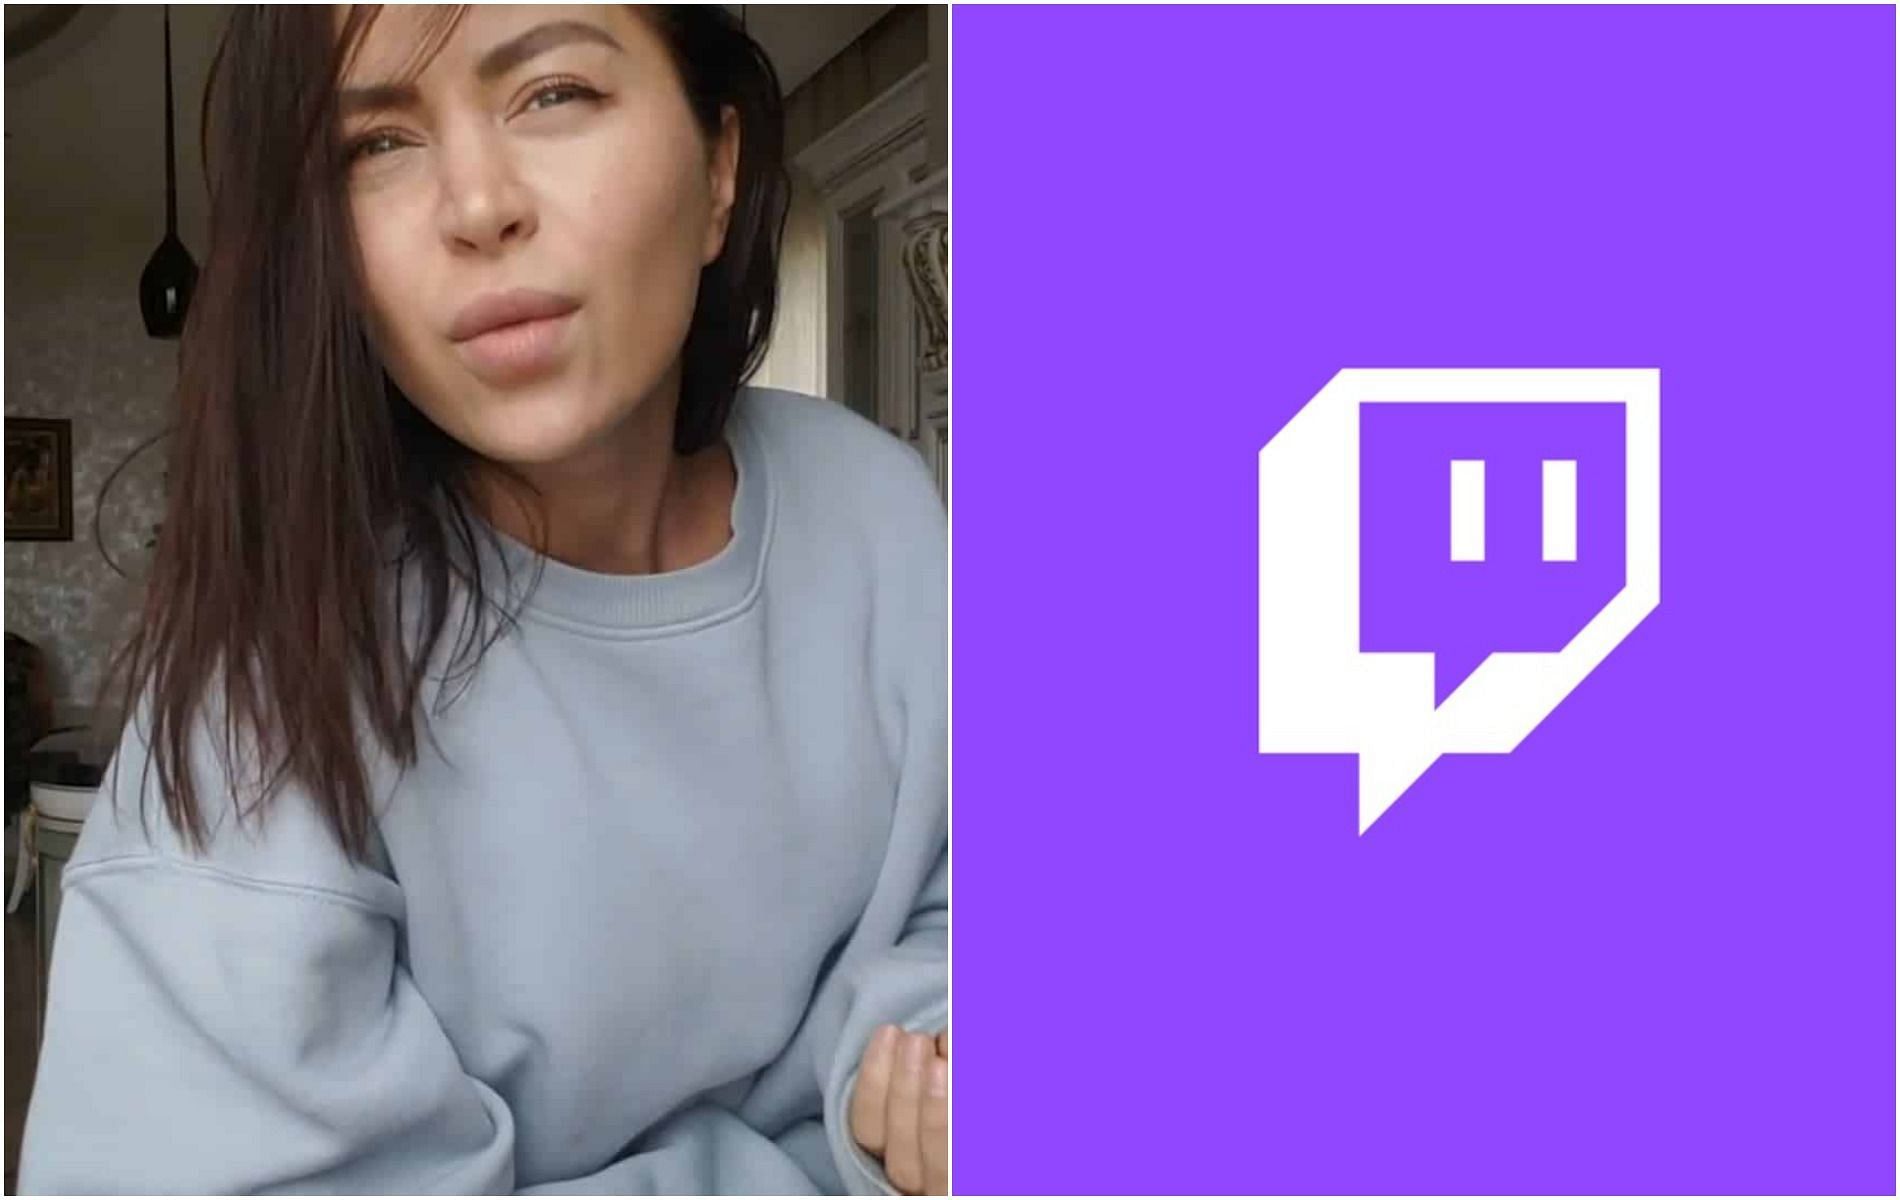 Twitch streamer Mira catches a fourth ban on the platform since October 2021 (Image via miratwitch/Twitch and Twitch)